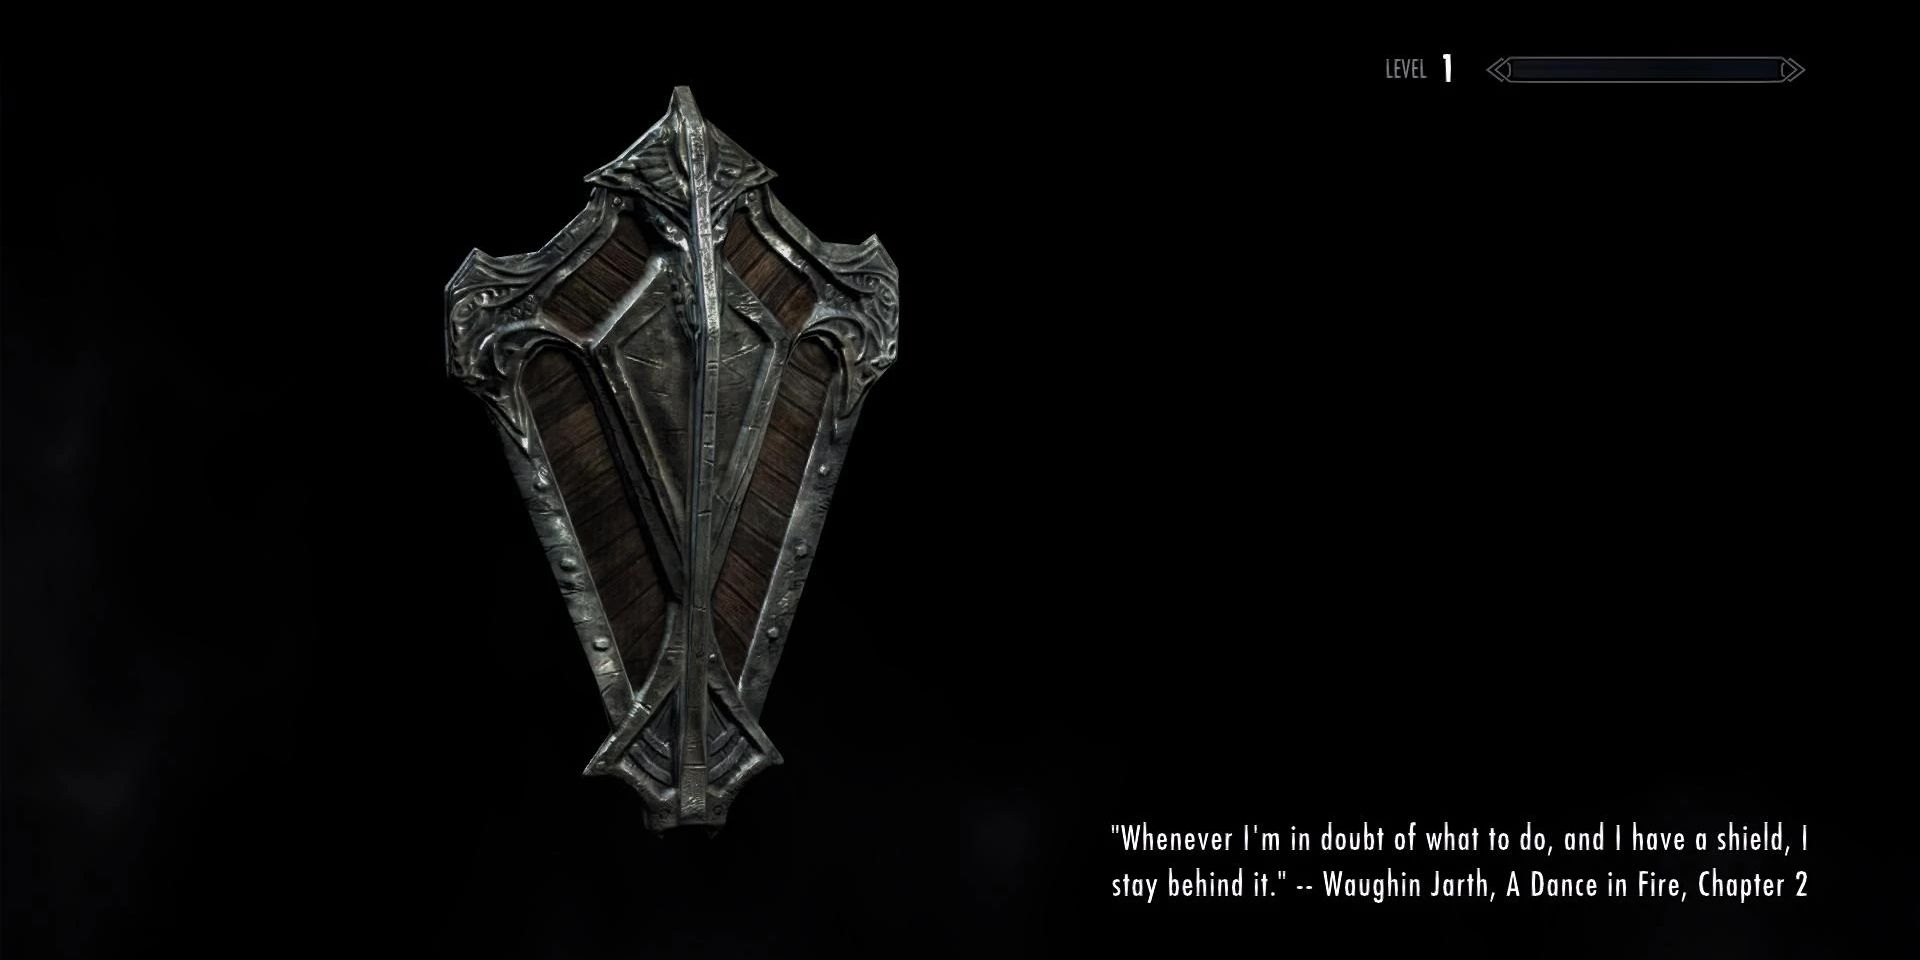 A shield in a loading screen with the quote "Whenever I'm in doubt of what to do, and I have a shield, I stay behind it."